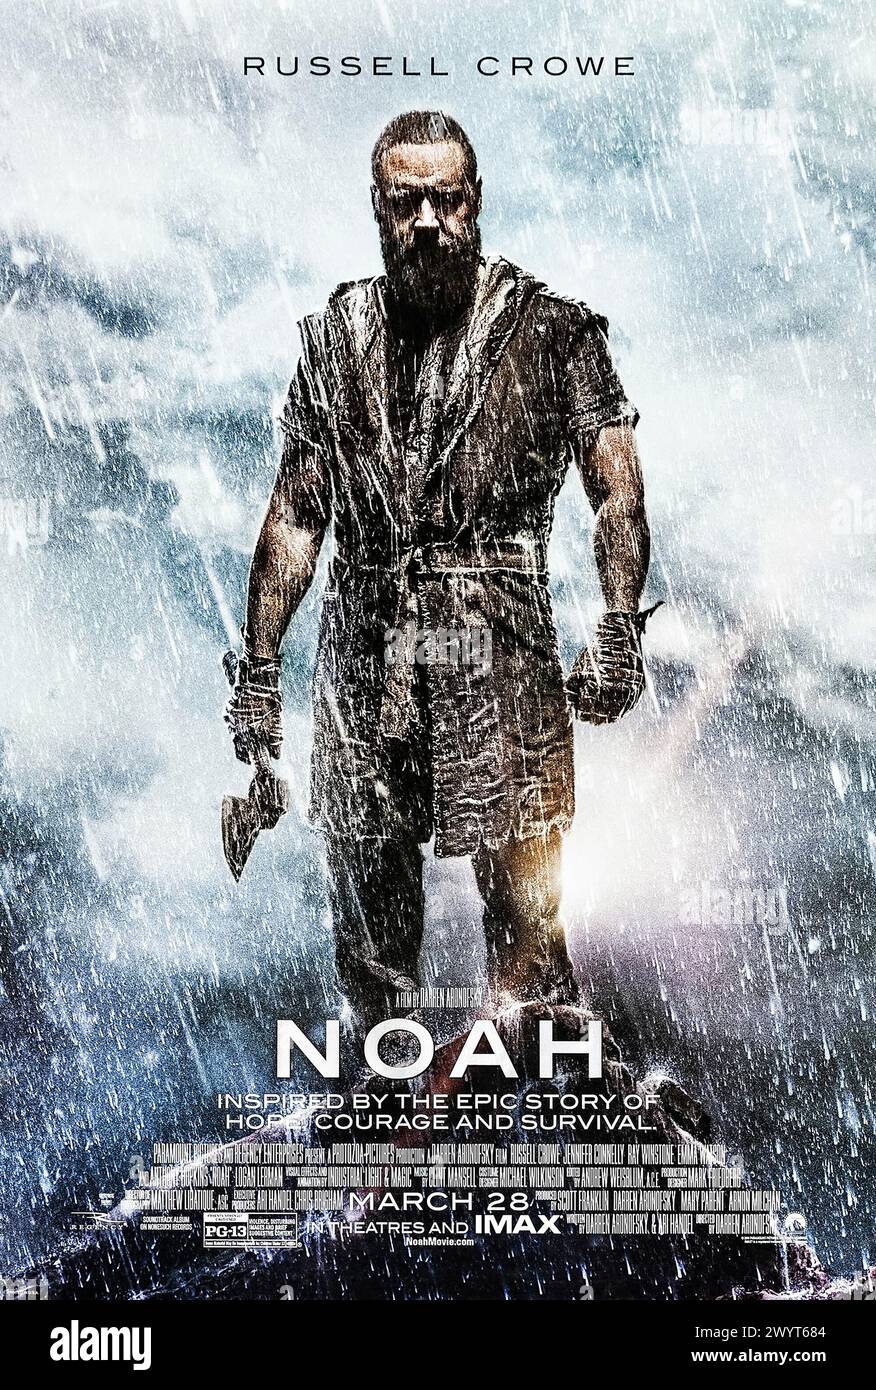 Noah (2014) directed by Darren Aronofsky and starring Russell Crowe, Jennifer Connelly, Emma Watson and Anthony Hopkins. Noah is chosen by God to undertake a momentous mission before an apocalyptic flood cleanses the world. Photograph of an original US advance poster.***EDITORIAL USE ONLY*** Credit: BFA / Paramount Pictures Stock Photo